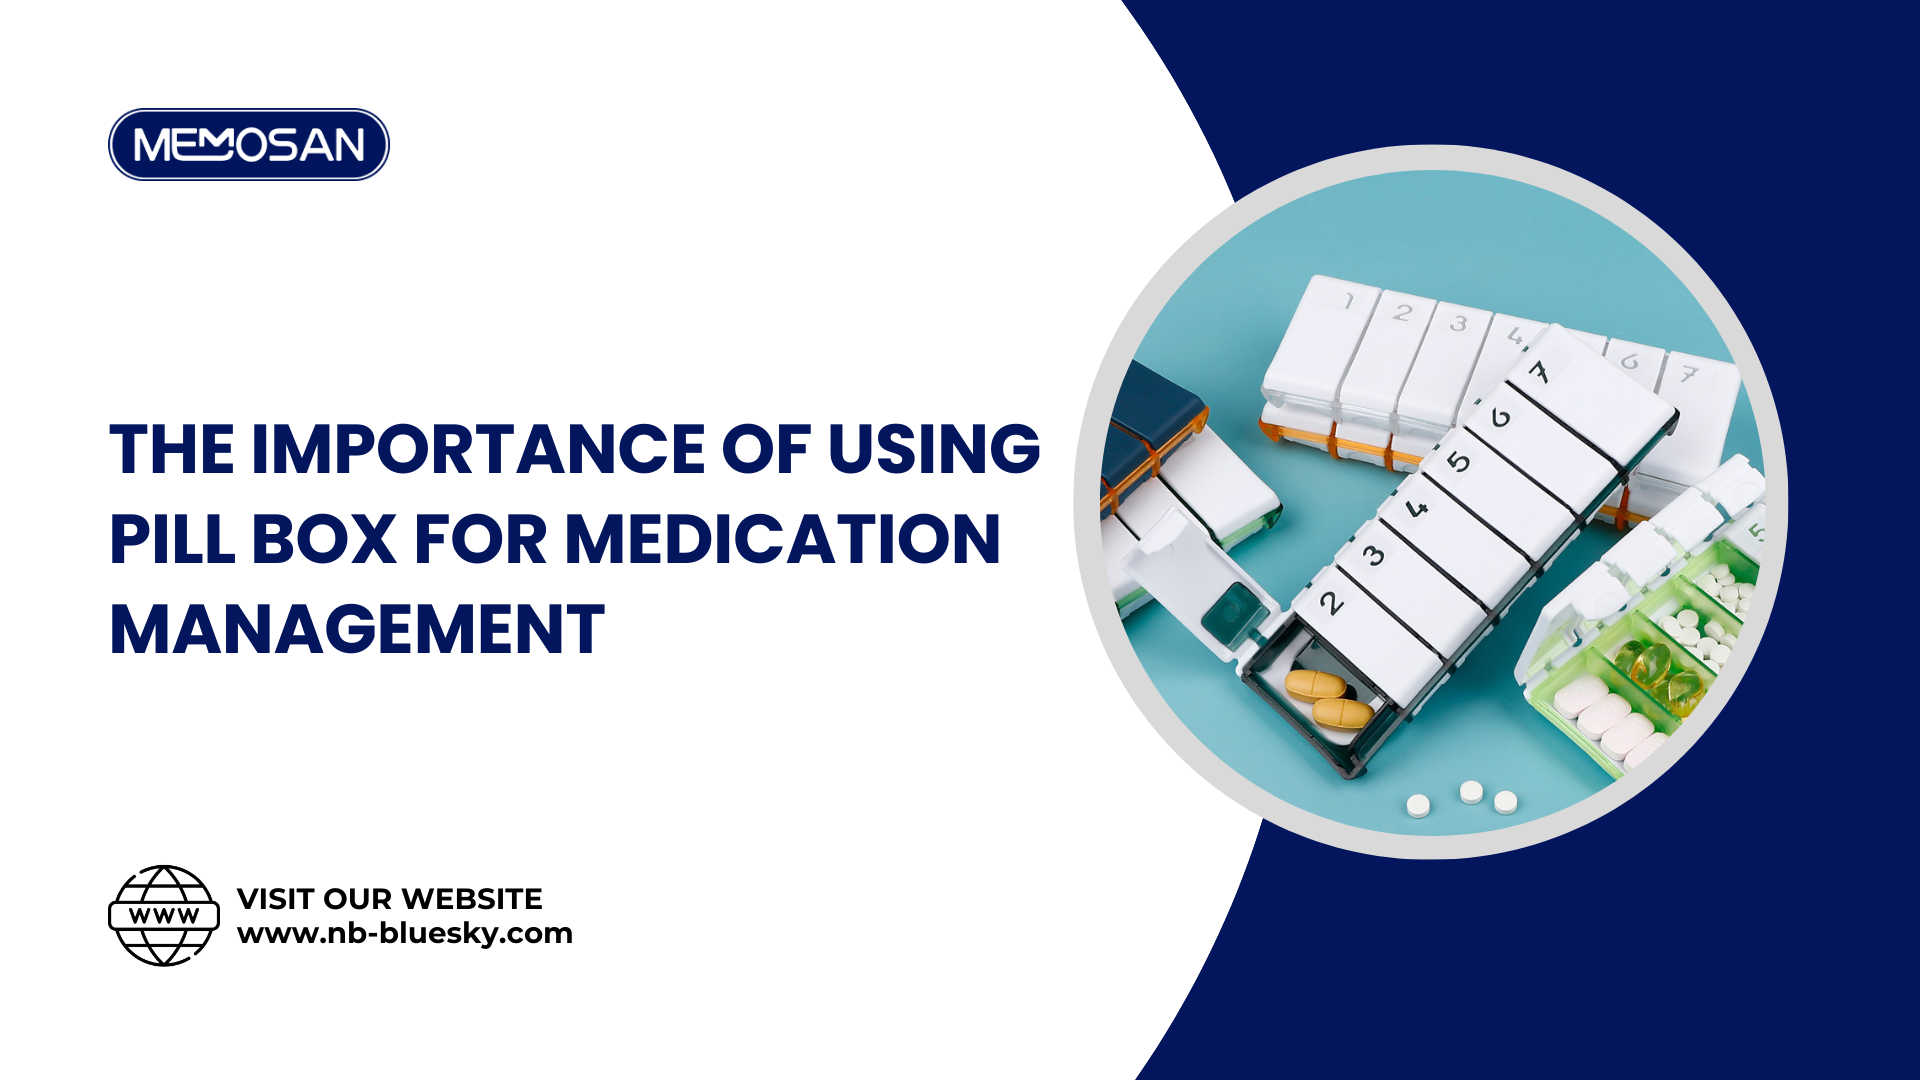 The importance of using pill box for medication management